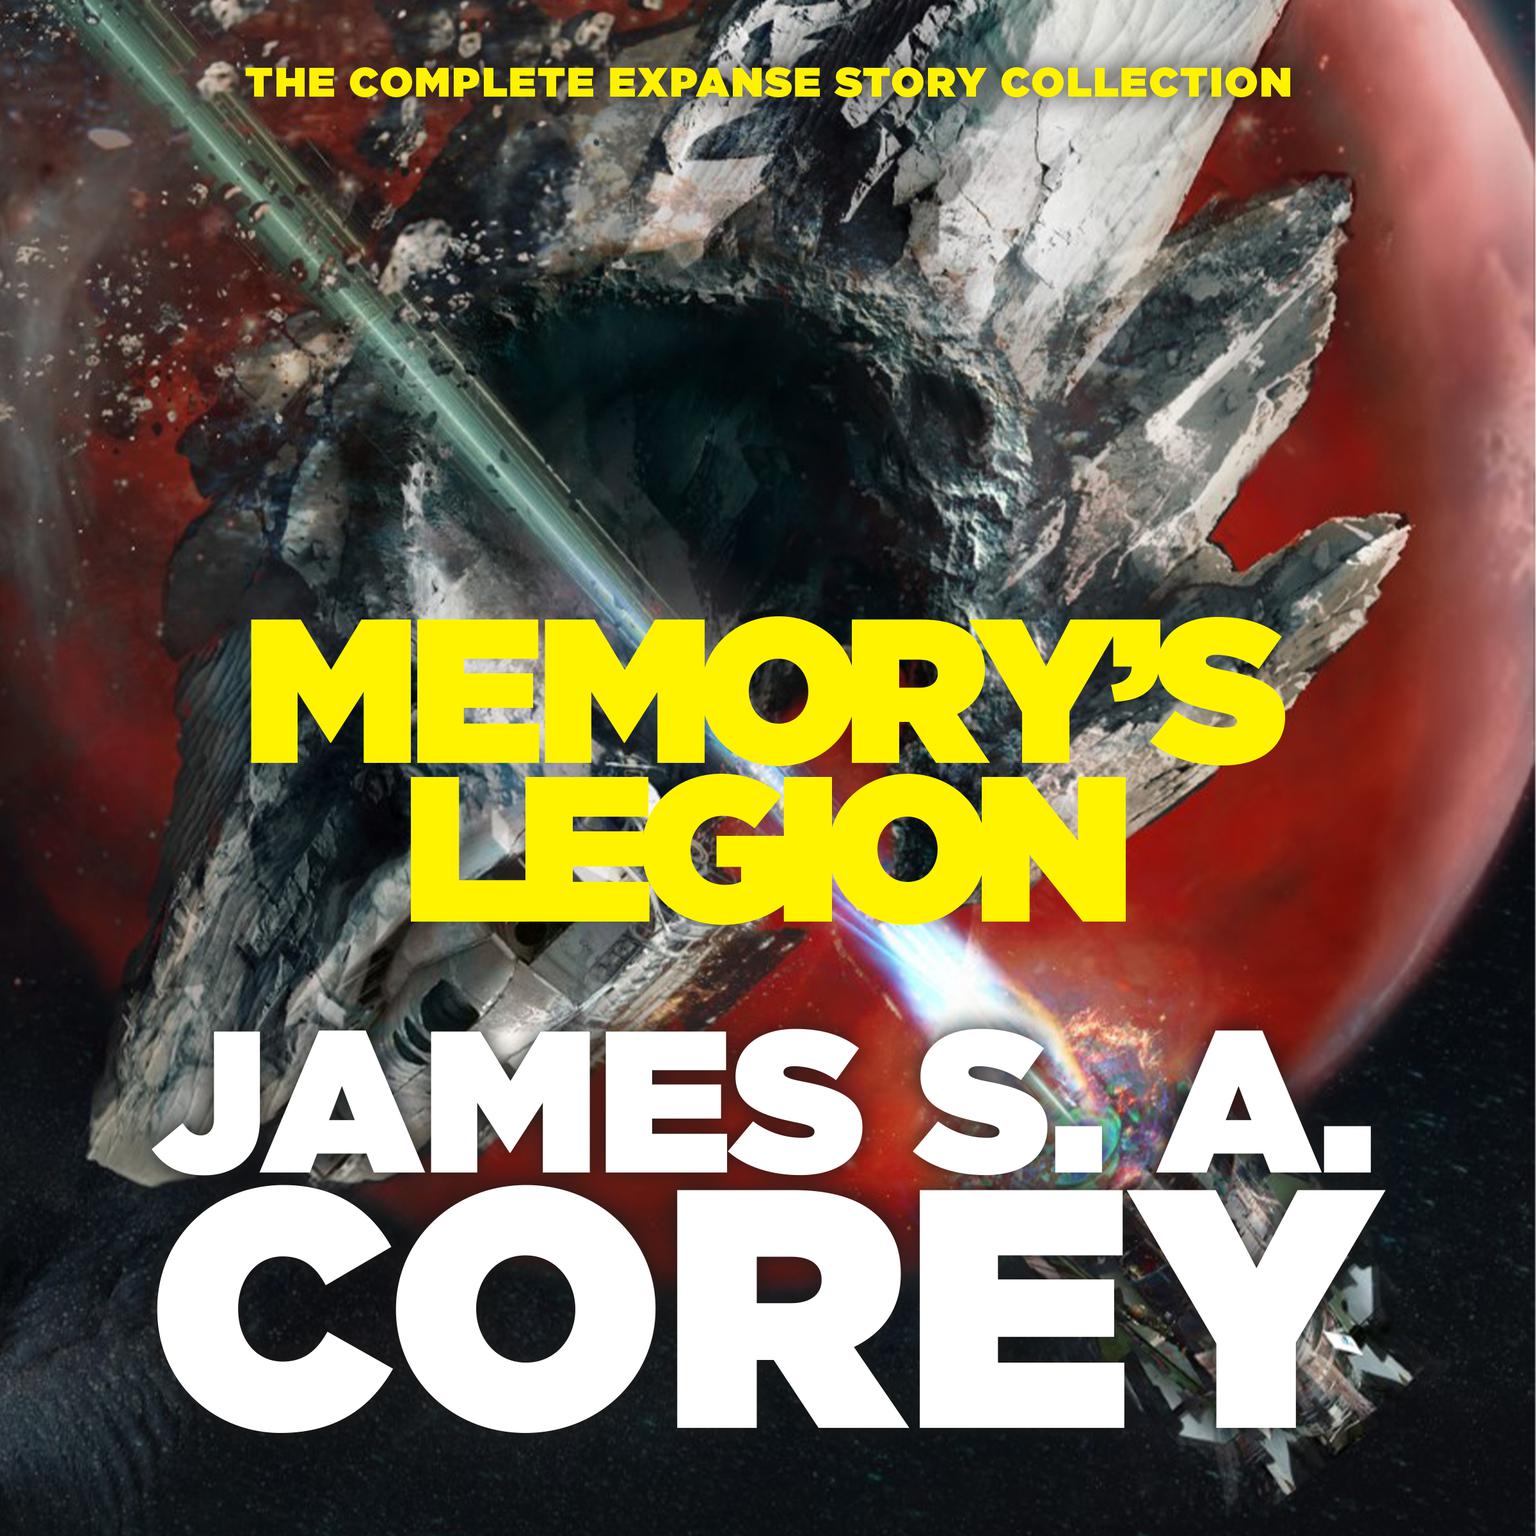 Memorys Legion: The Complete Expanse Story Collection Audiobook, by James S. A. Corey